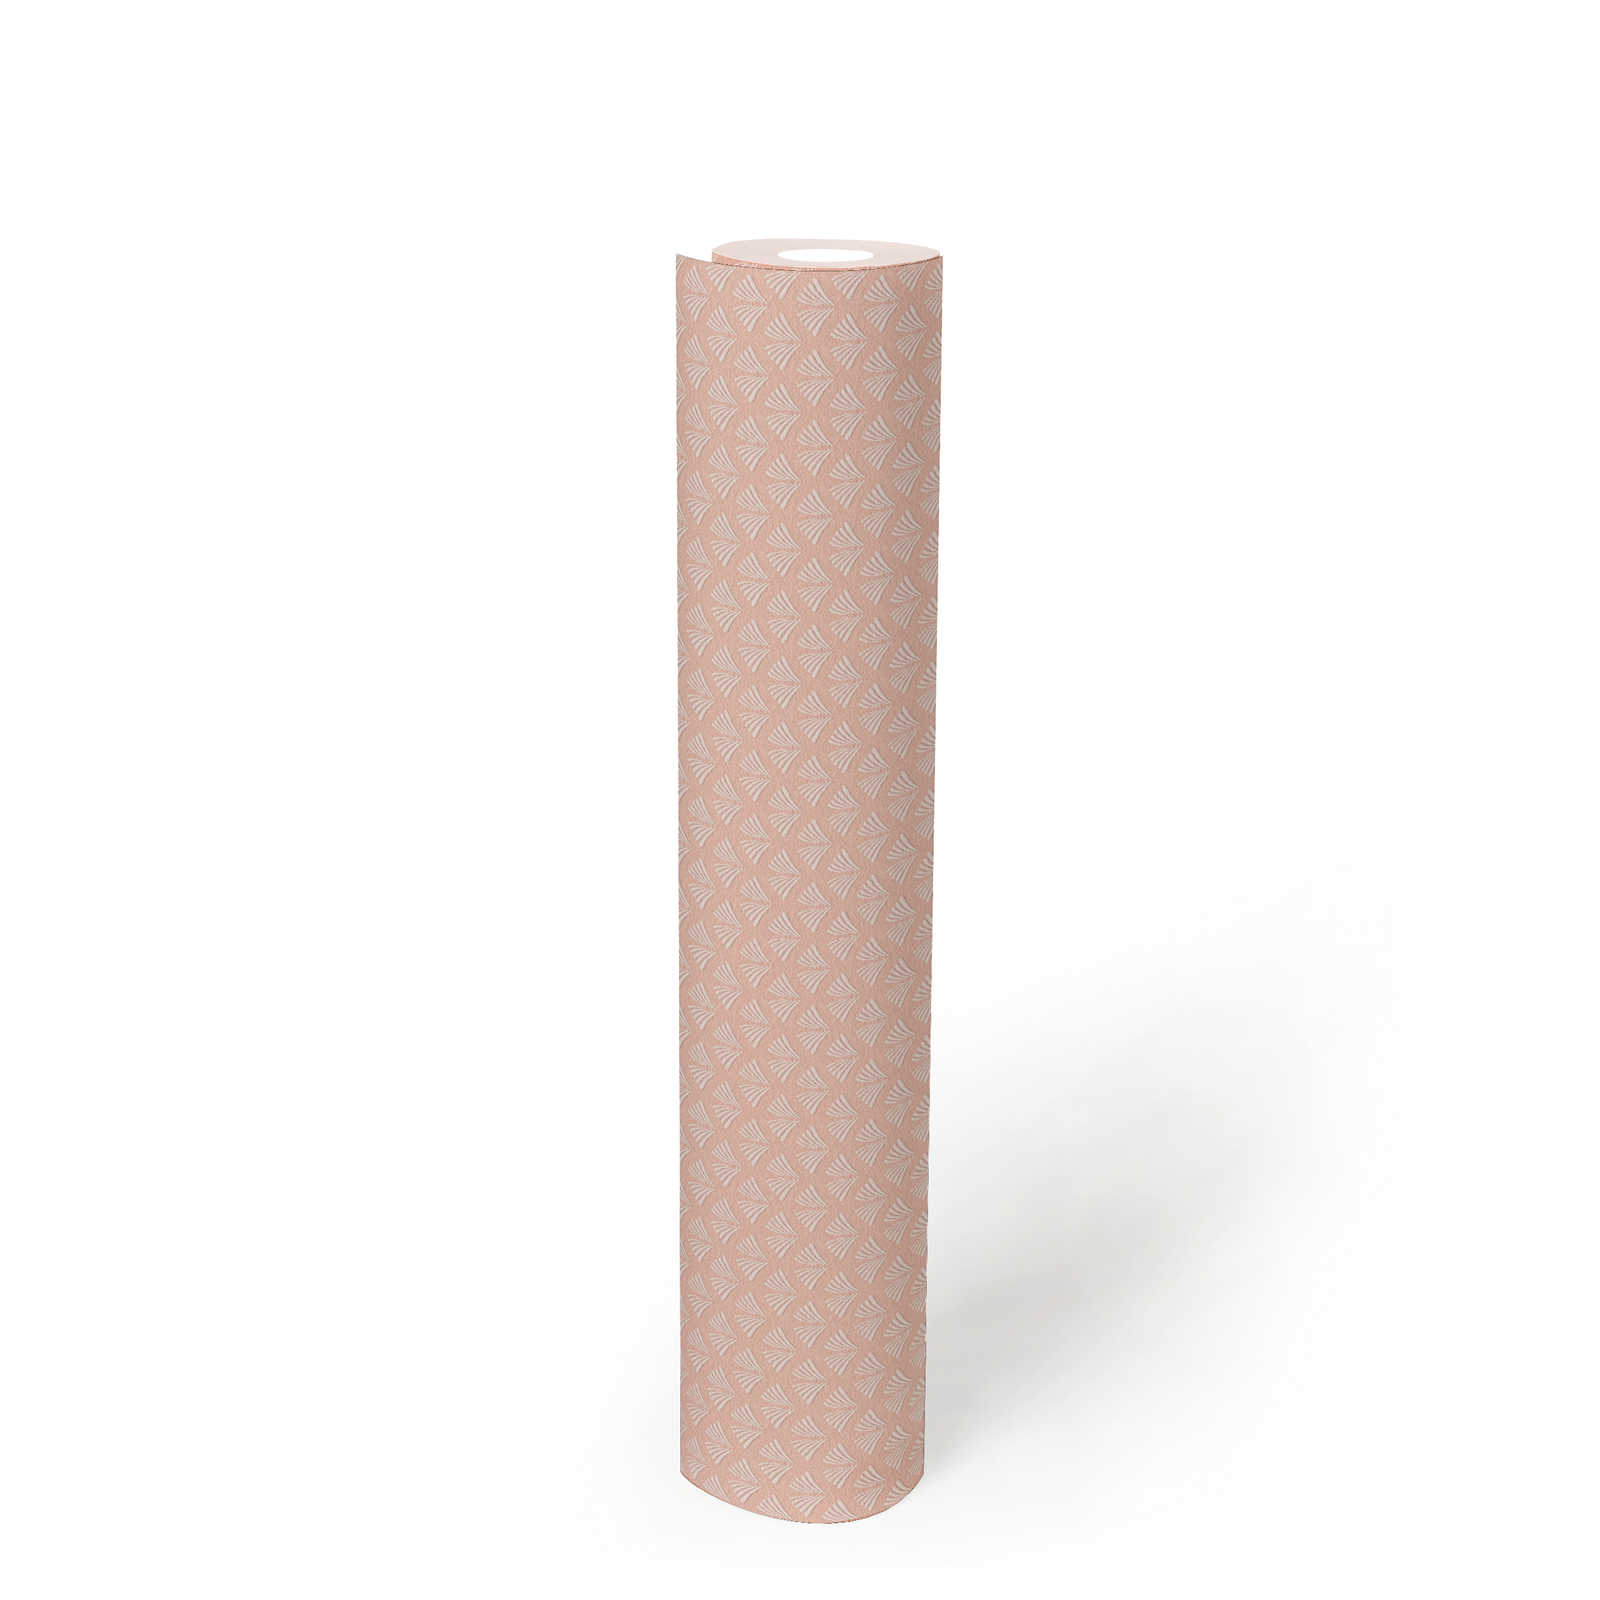             Pink non-woven wallpaper with white filigree pattern in feminine look
        